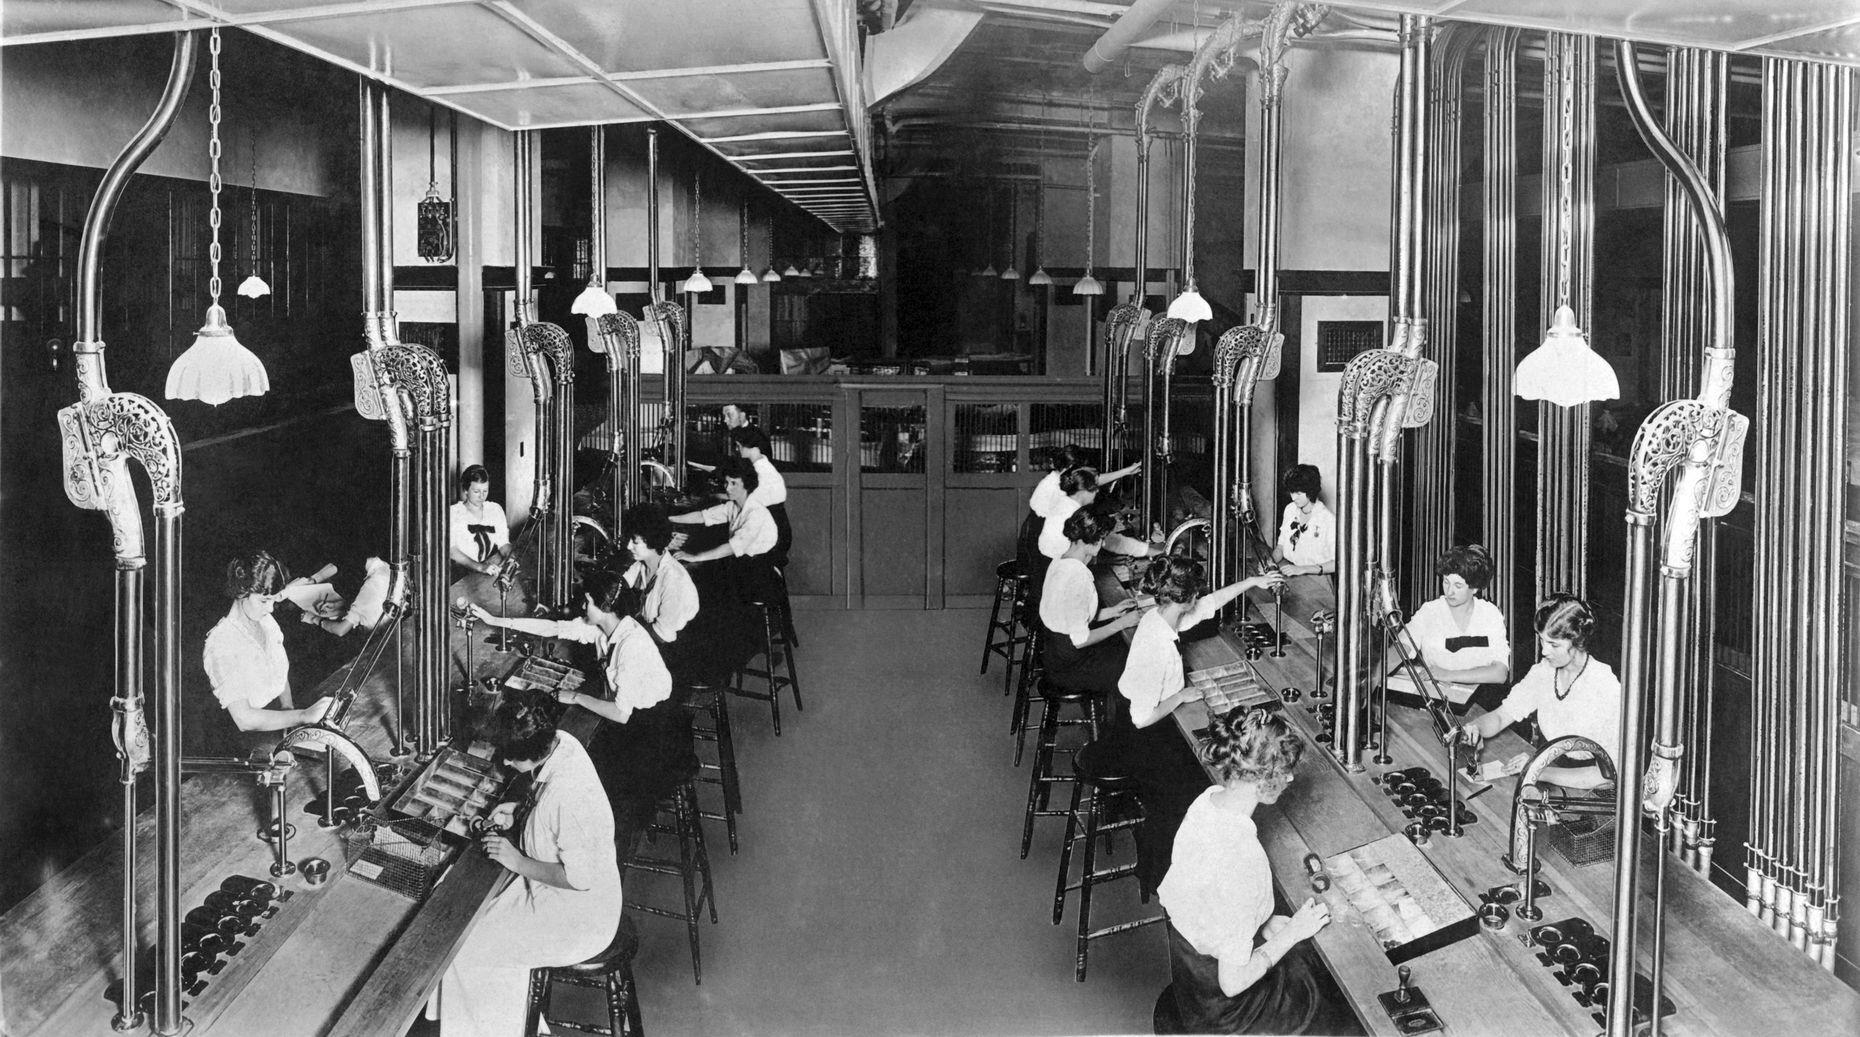 <p>In big department stores, women worked in the basement making change for the cashiers by means of a <a href="https://www.businessinsider.com/pneumatic-tubing-system-used-for-trading-2013-4">pneumatic tubing system</a> that would whisk the change capsules upstairs.</p>